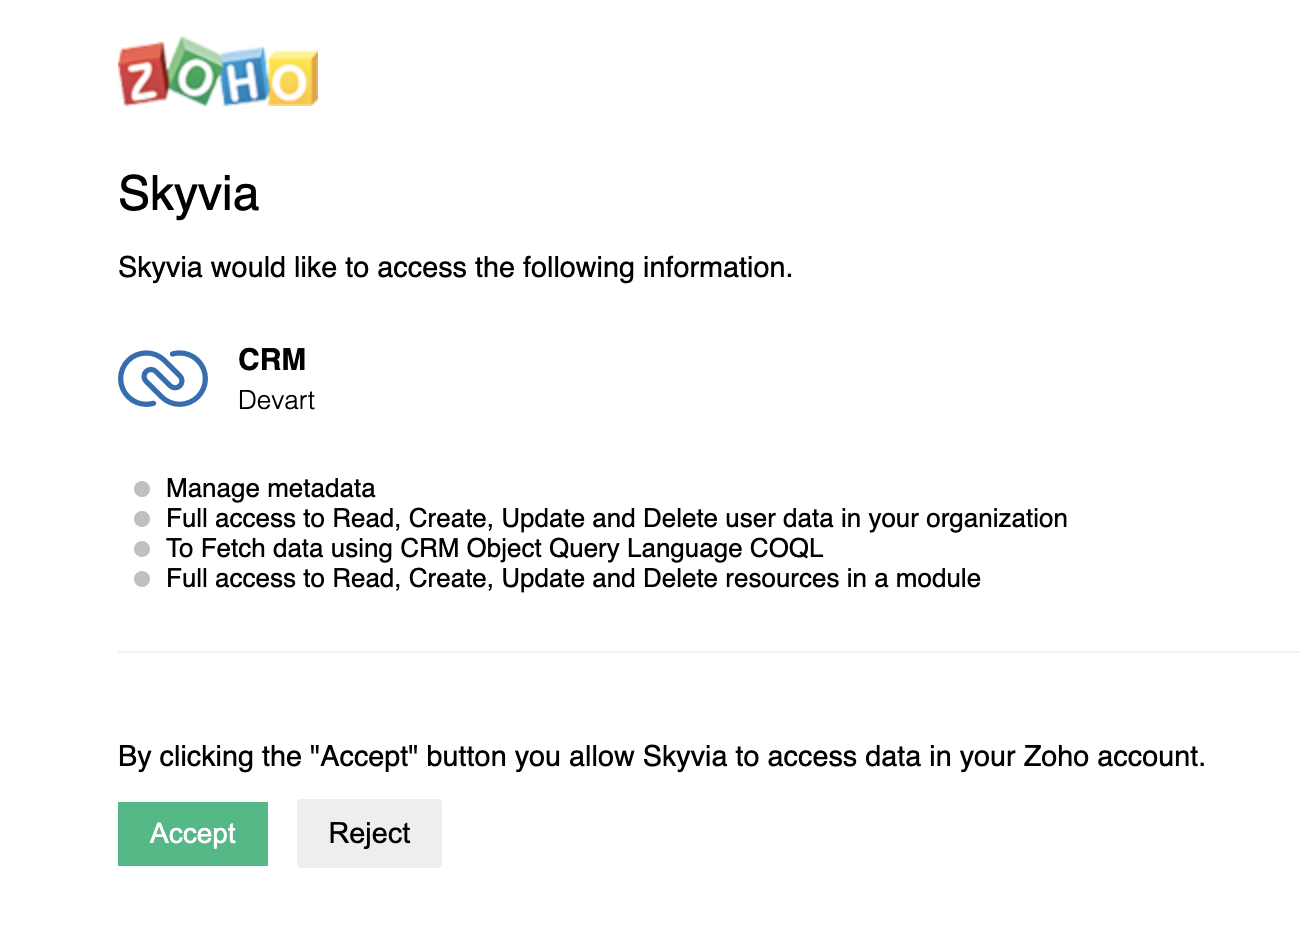 Granting access to Zoho CRM data